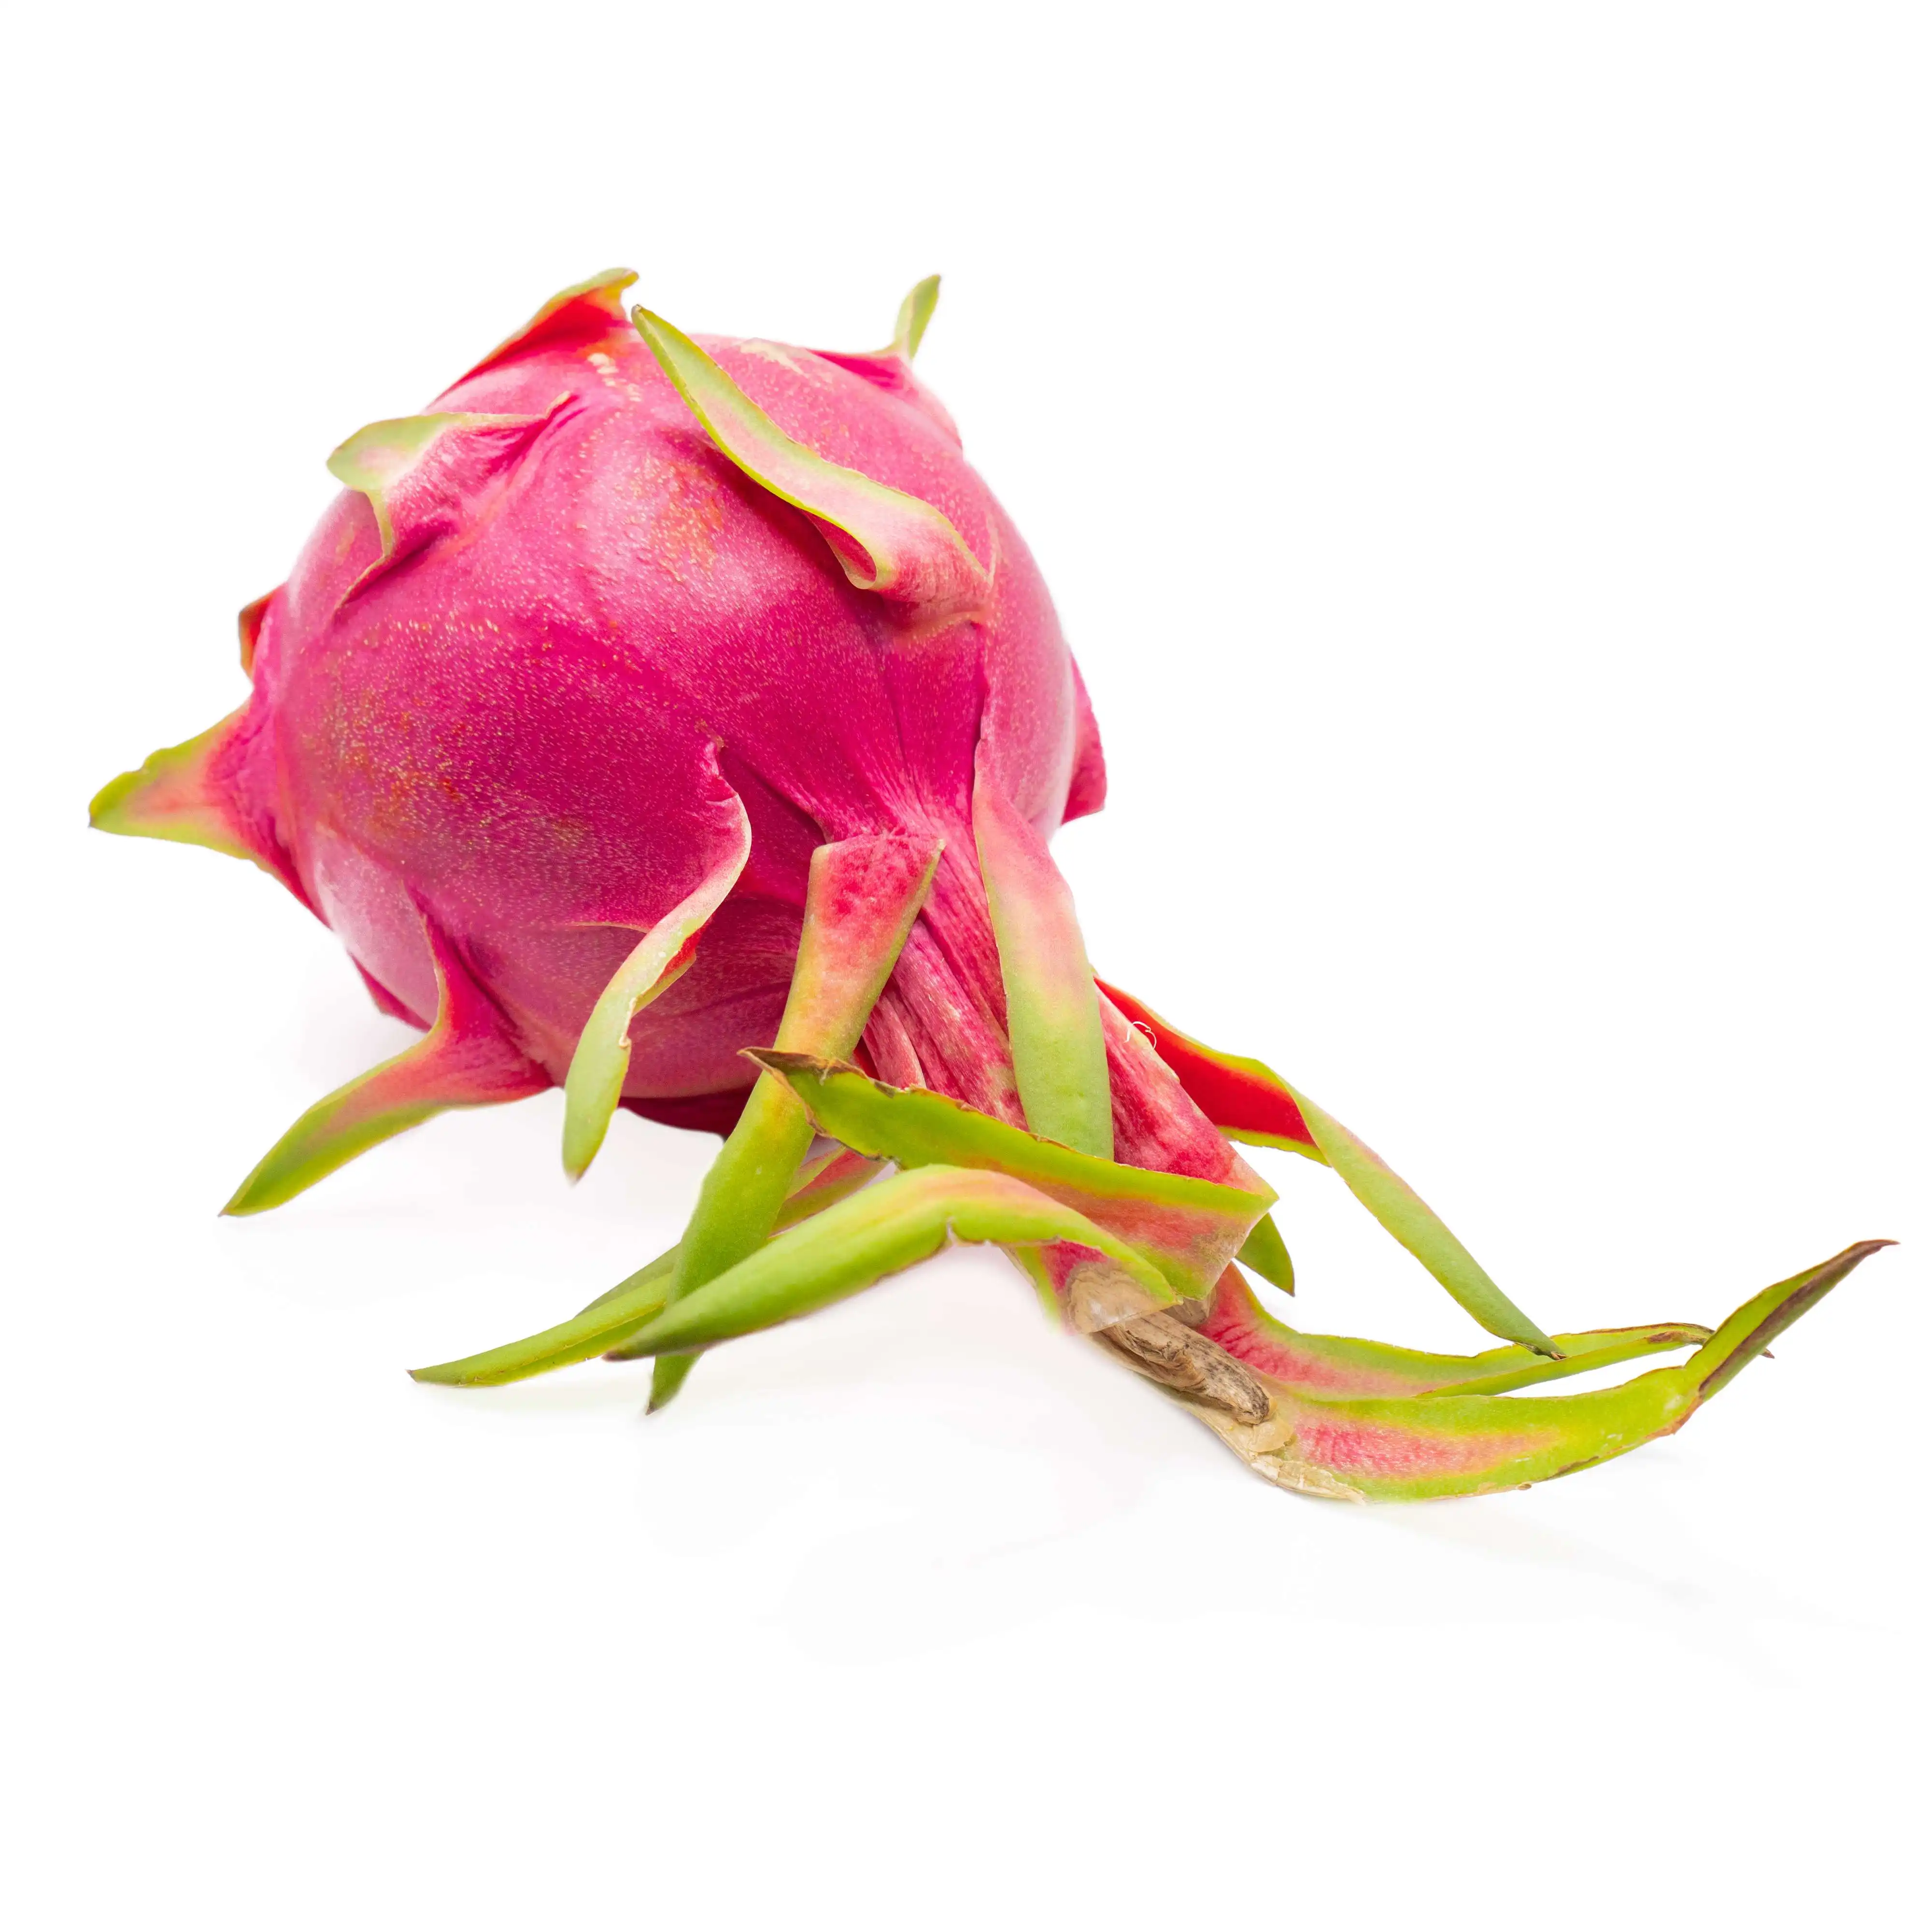 100% Natural Hot Selling Sweet Fresh Dragon Fruit From Supplier In Vietnam Competitive Price Ready Export Vietnam Manufacturer